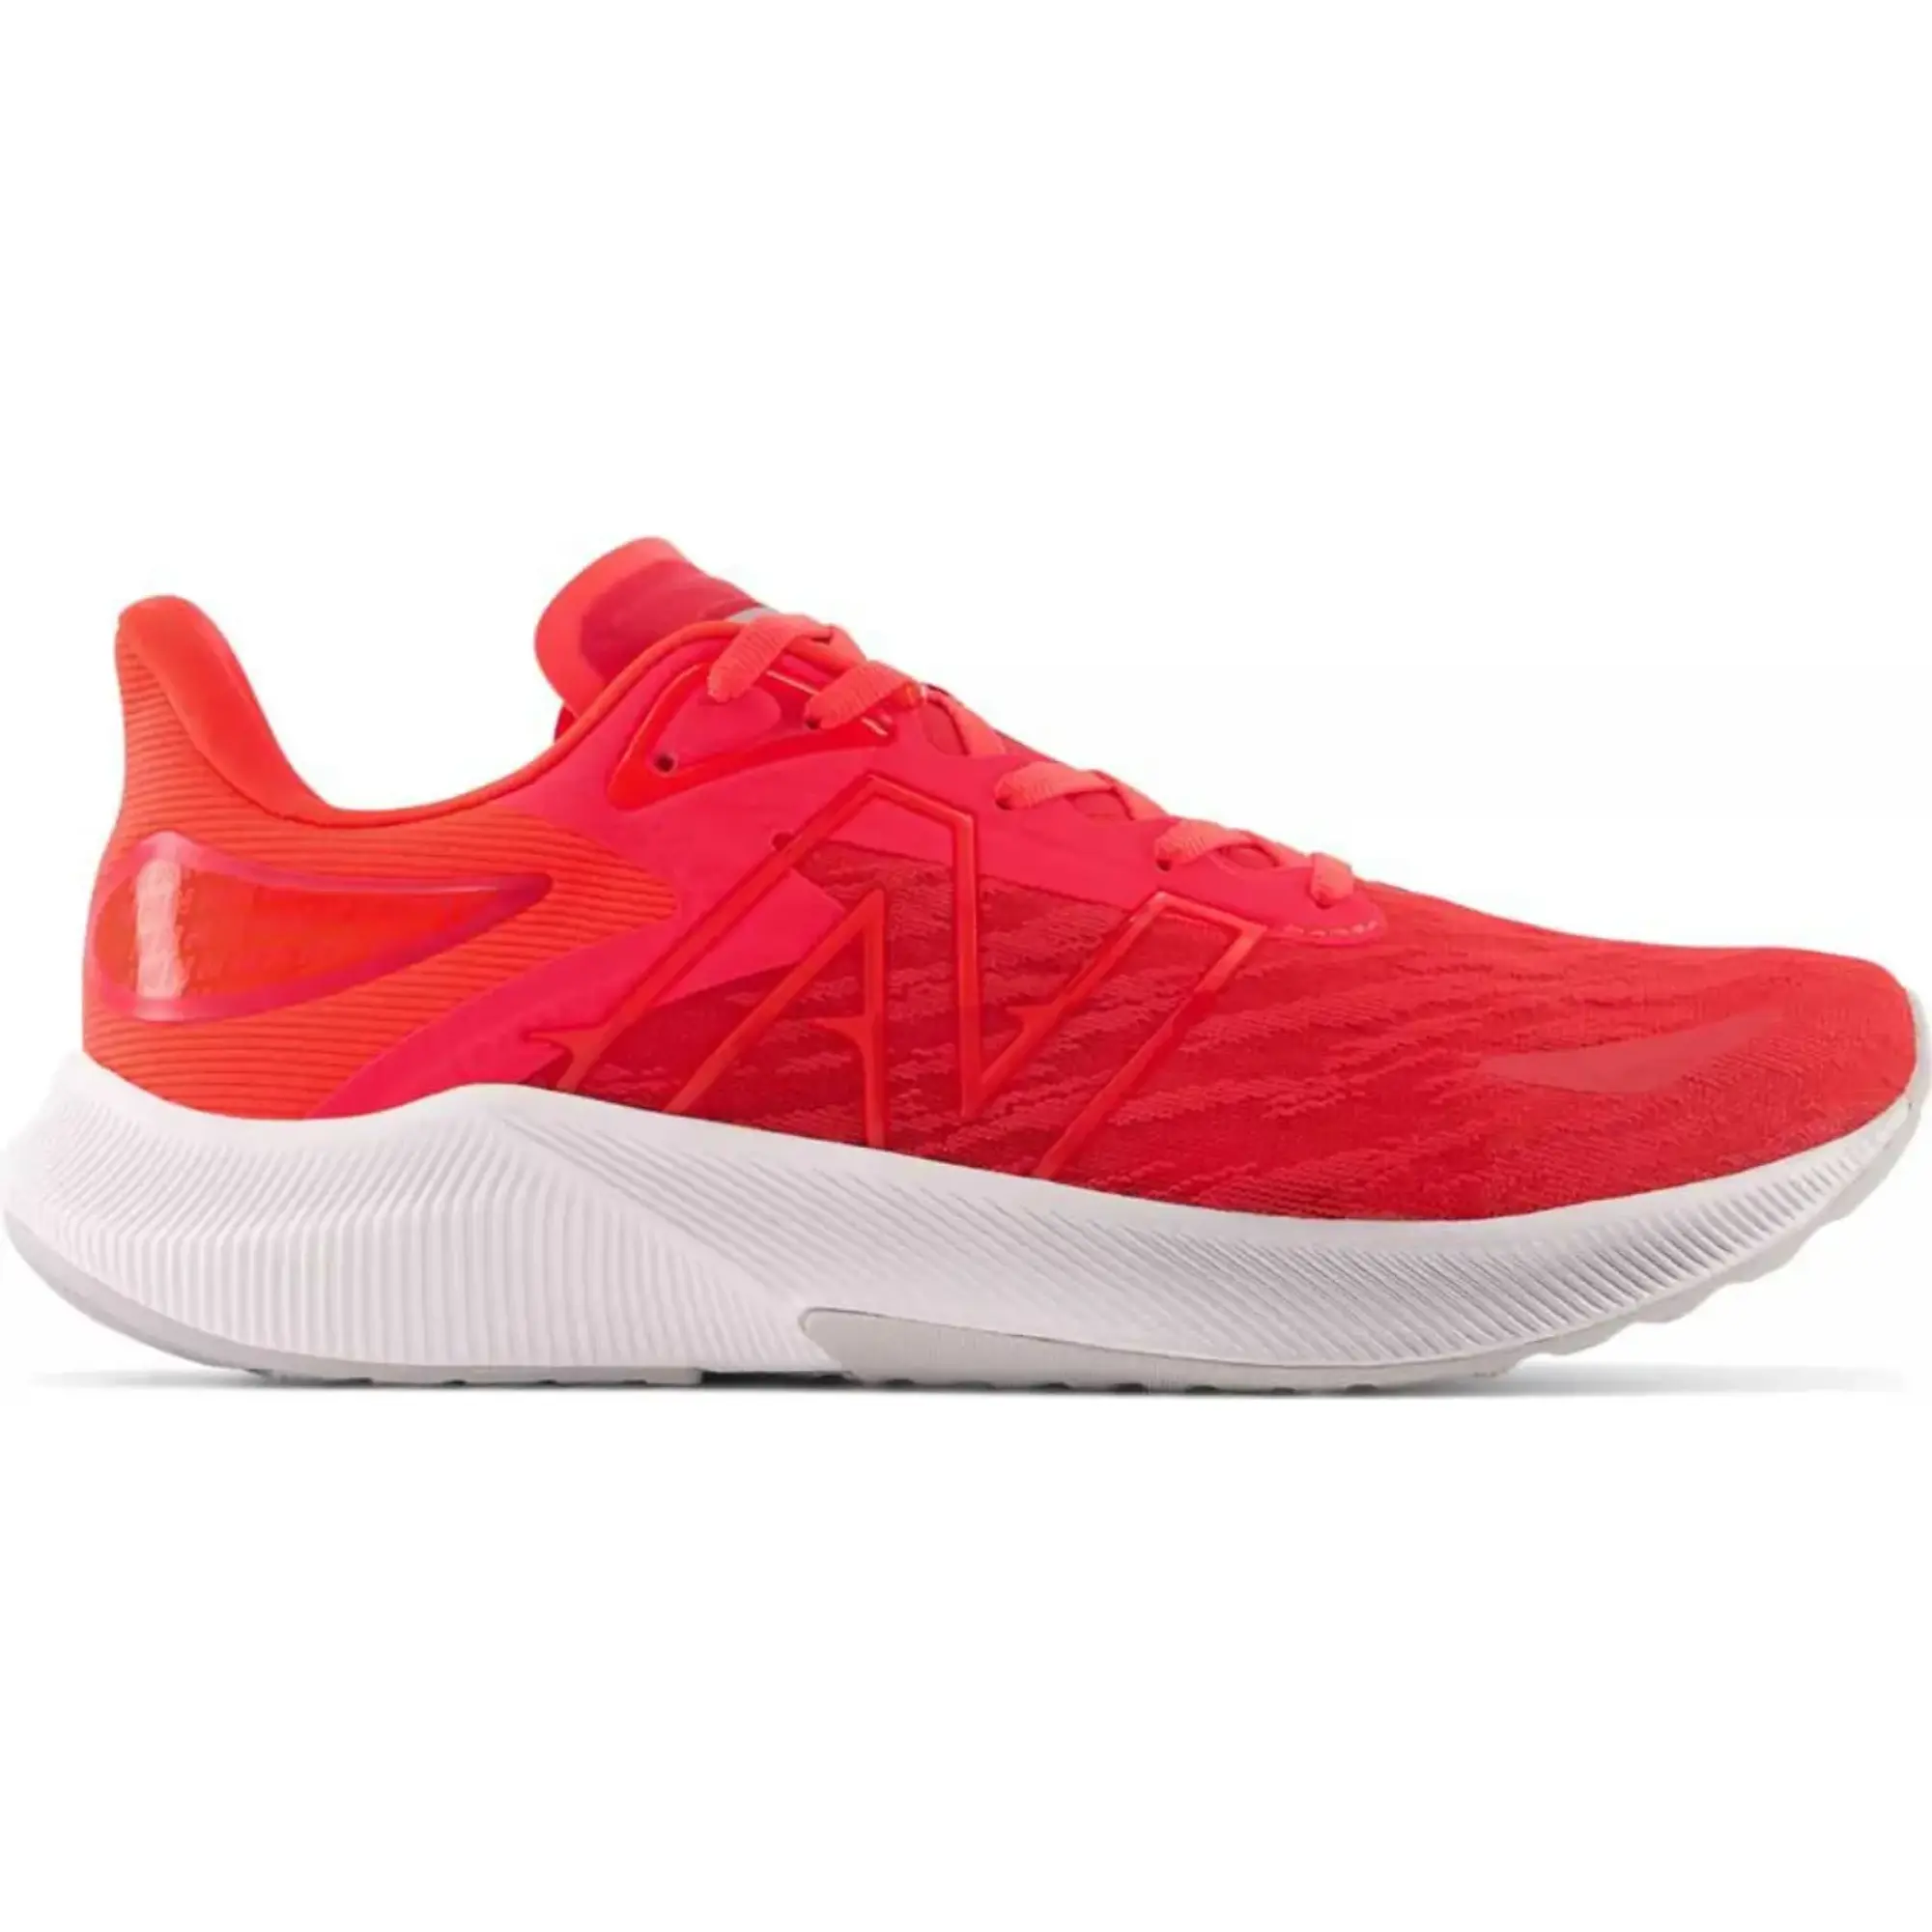 New Balance Fuelcell Propel V3 Running Shoes  - Red